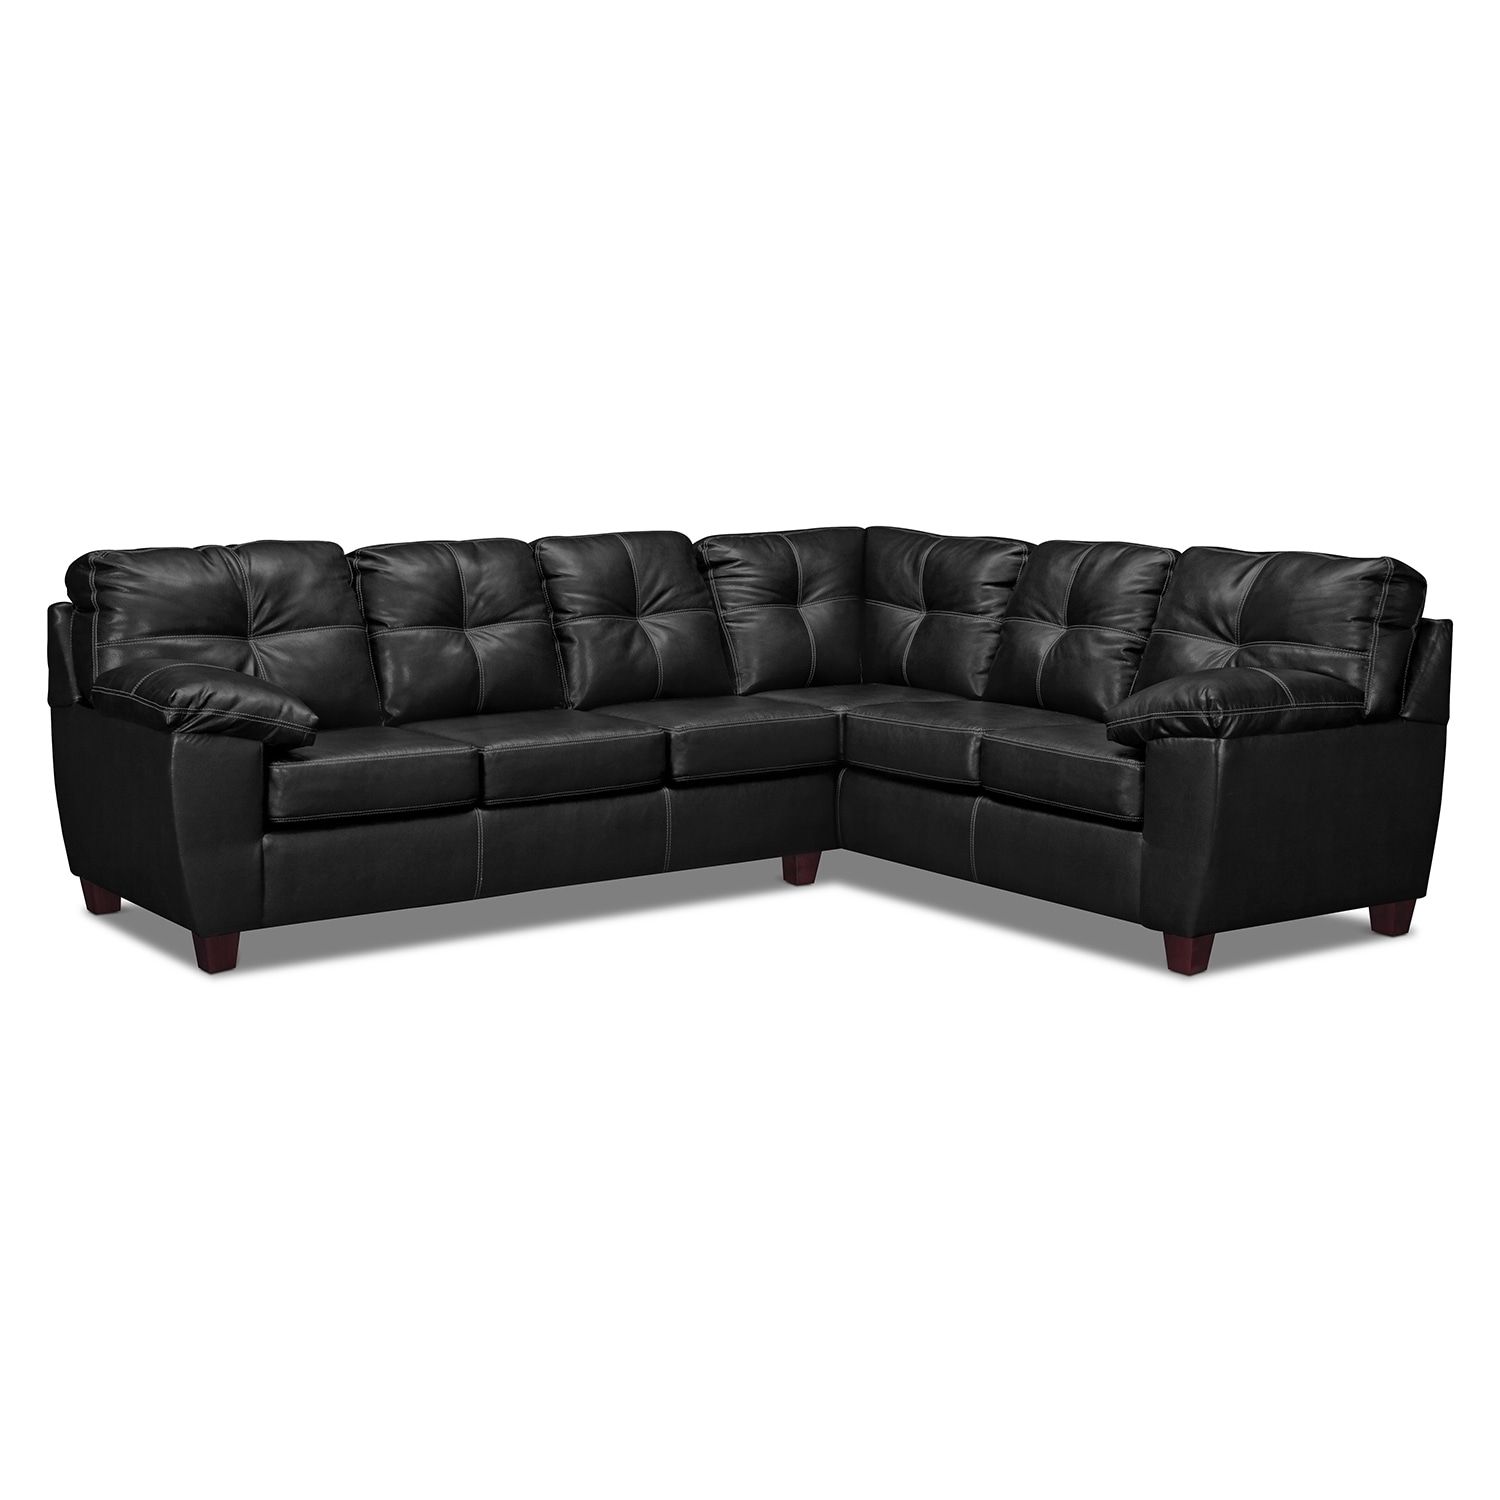 Featured Photo of 10 Photos Quad Cities Sectional Sofas